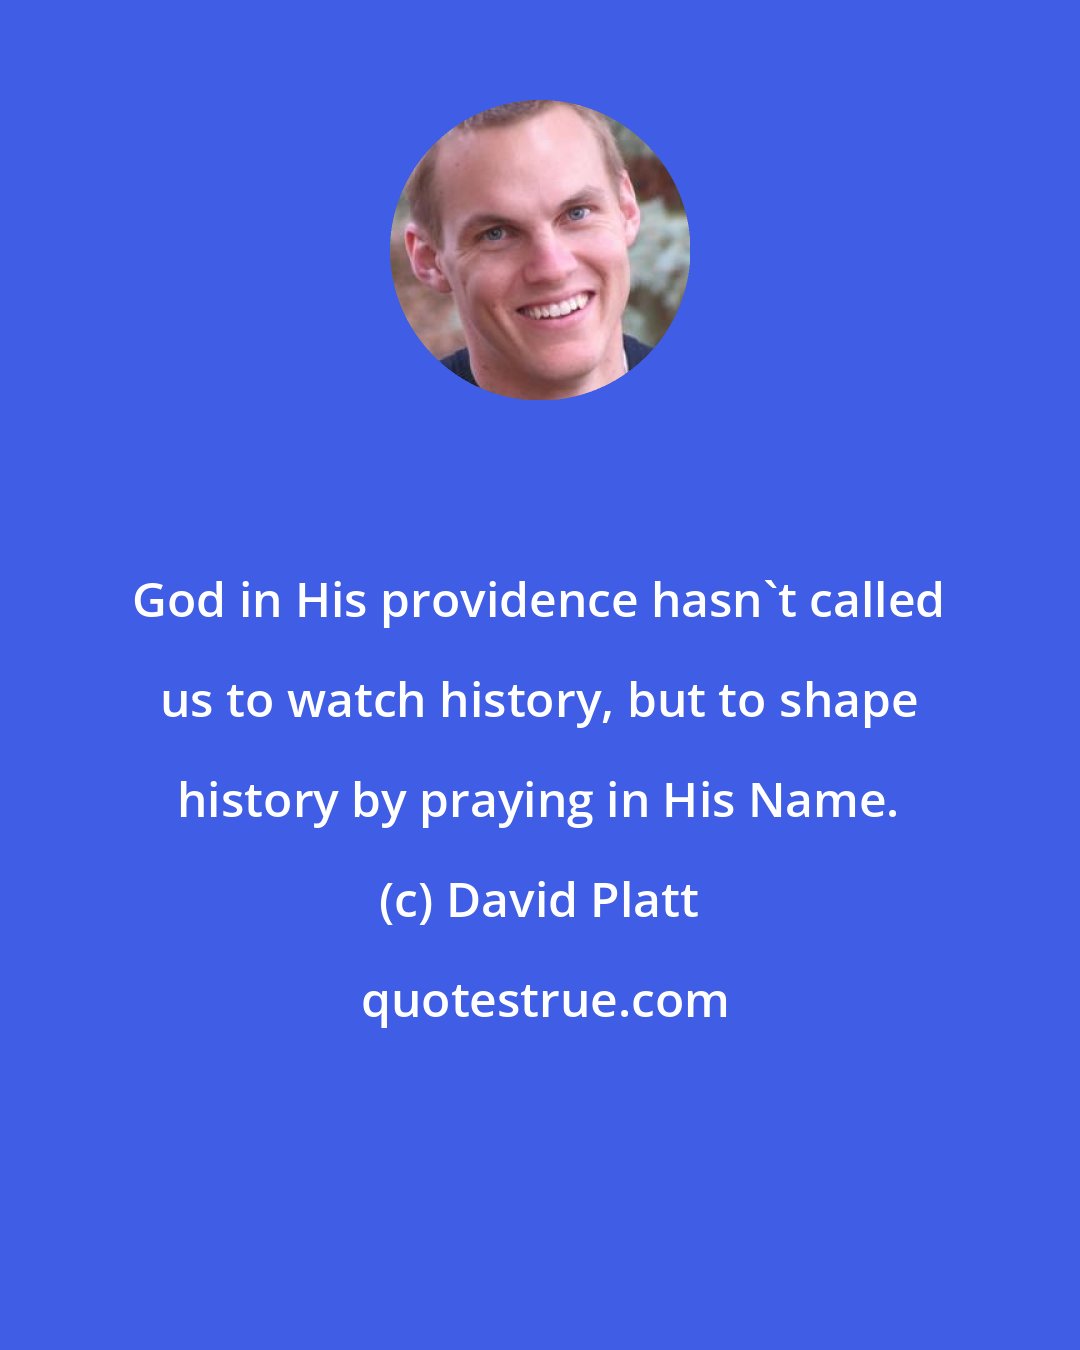 David Platt: God in His providence hasn't called us to watch history, but to shape history by praying in His Name.